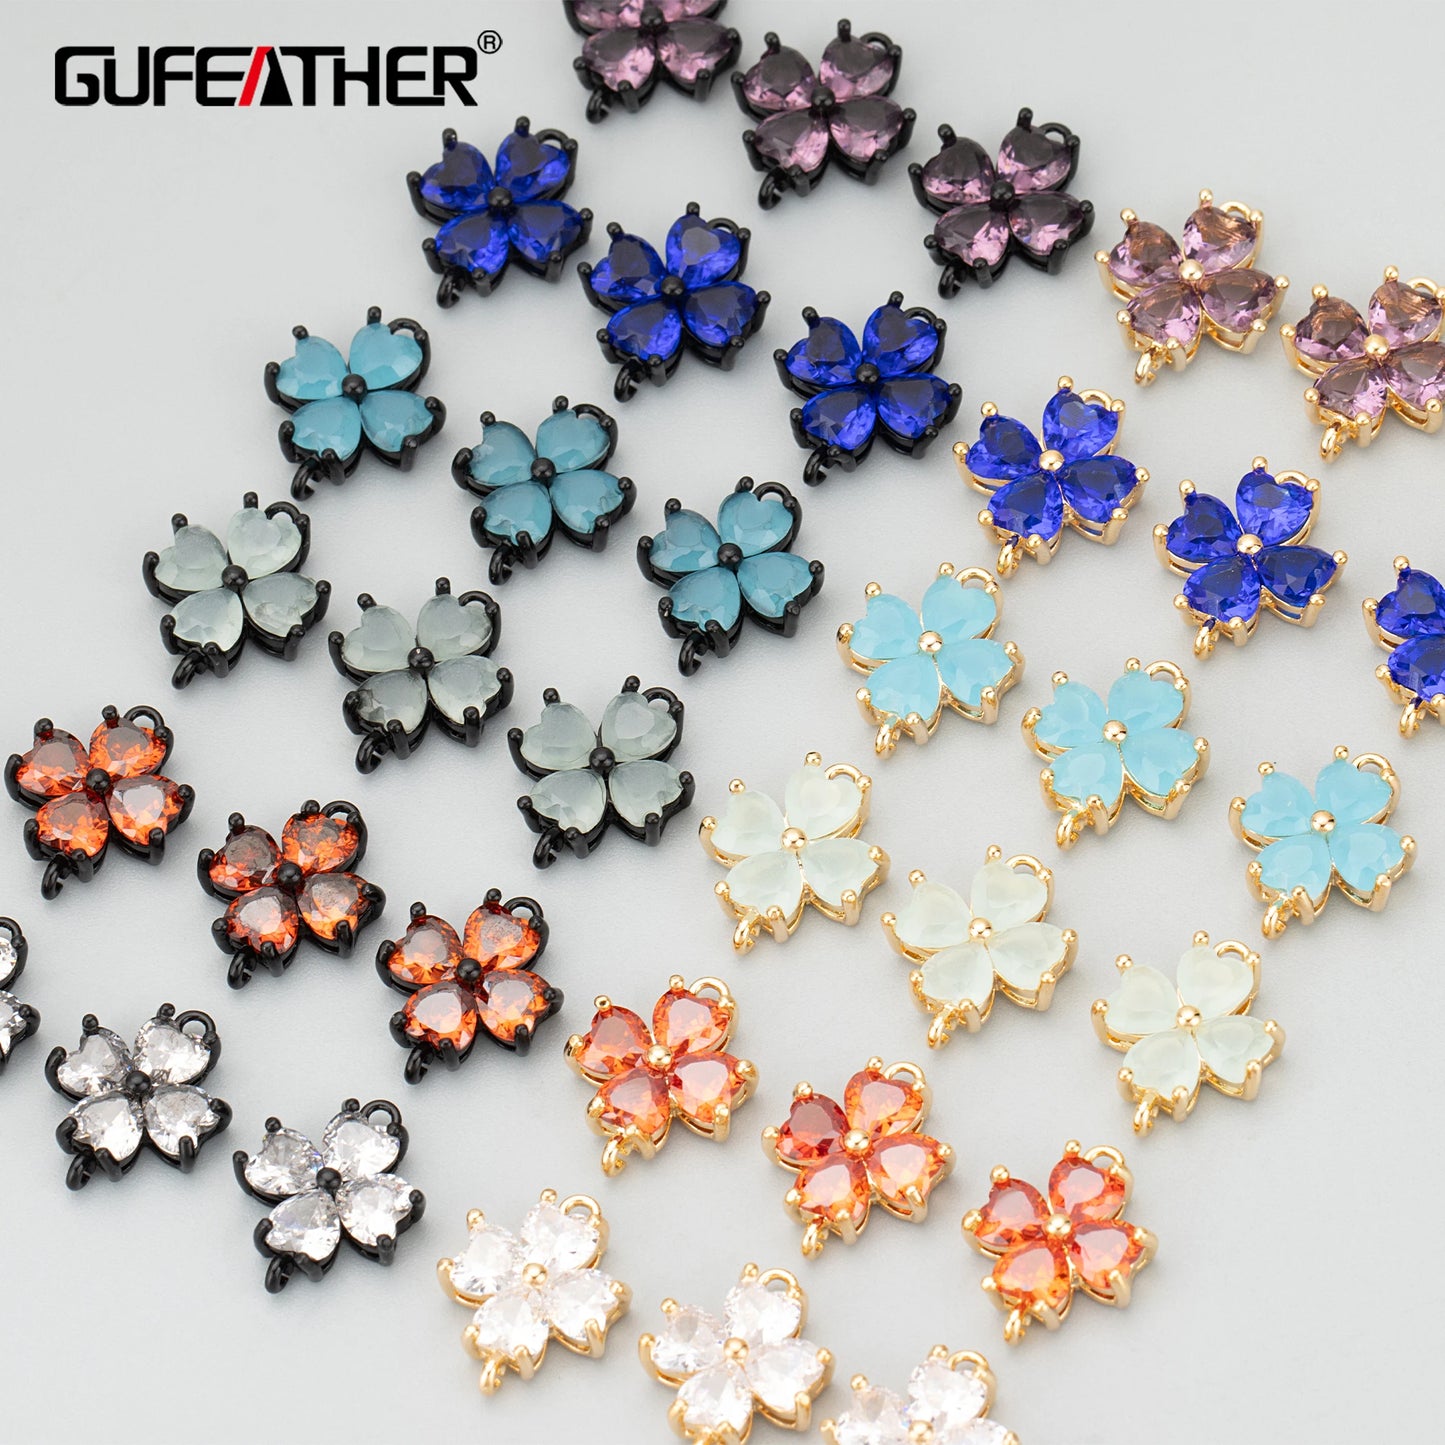 GUFEATHER MD75,jewelry accessories,18k gold black plated,copper,zircons,hand made,charms,jewelry making,diy pendants,6pcs/lot